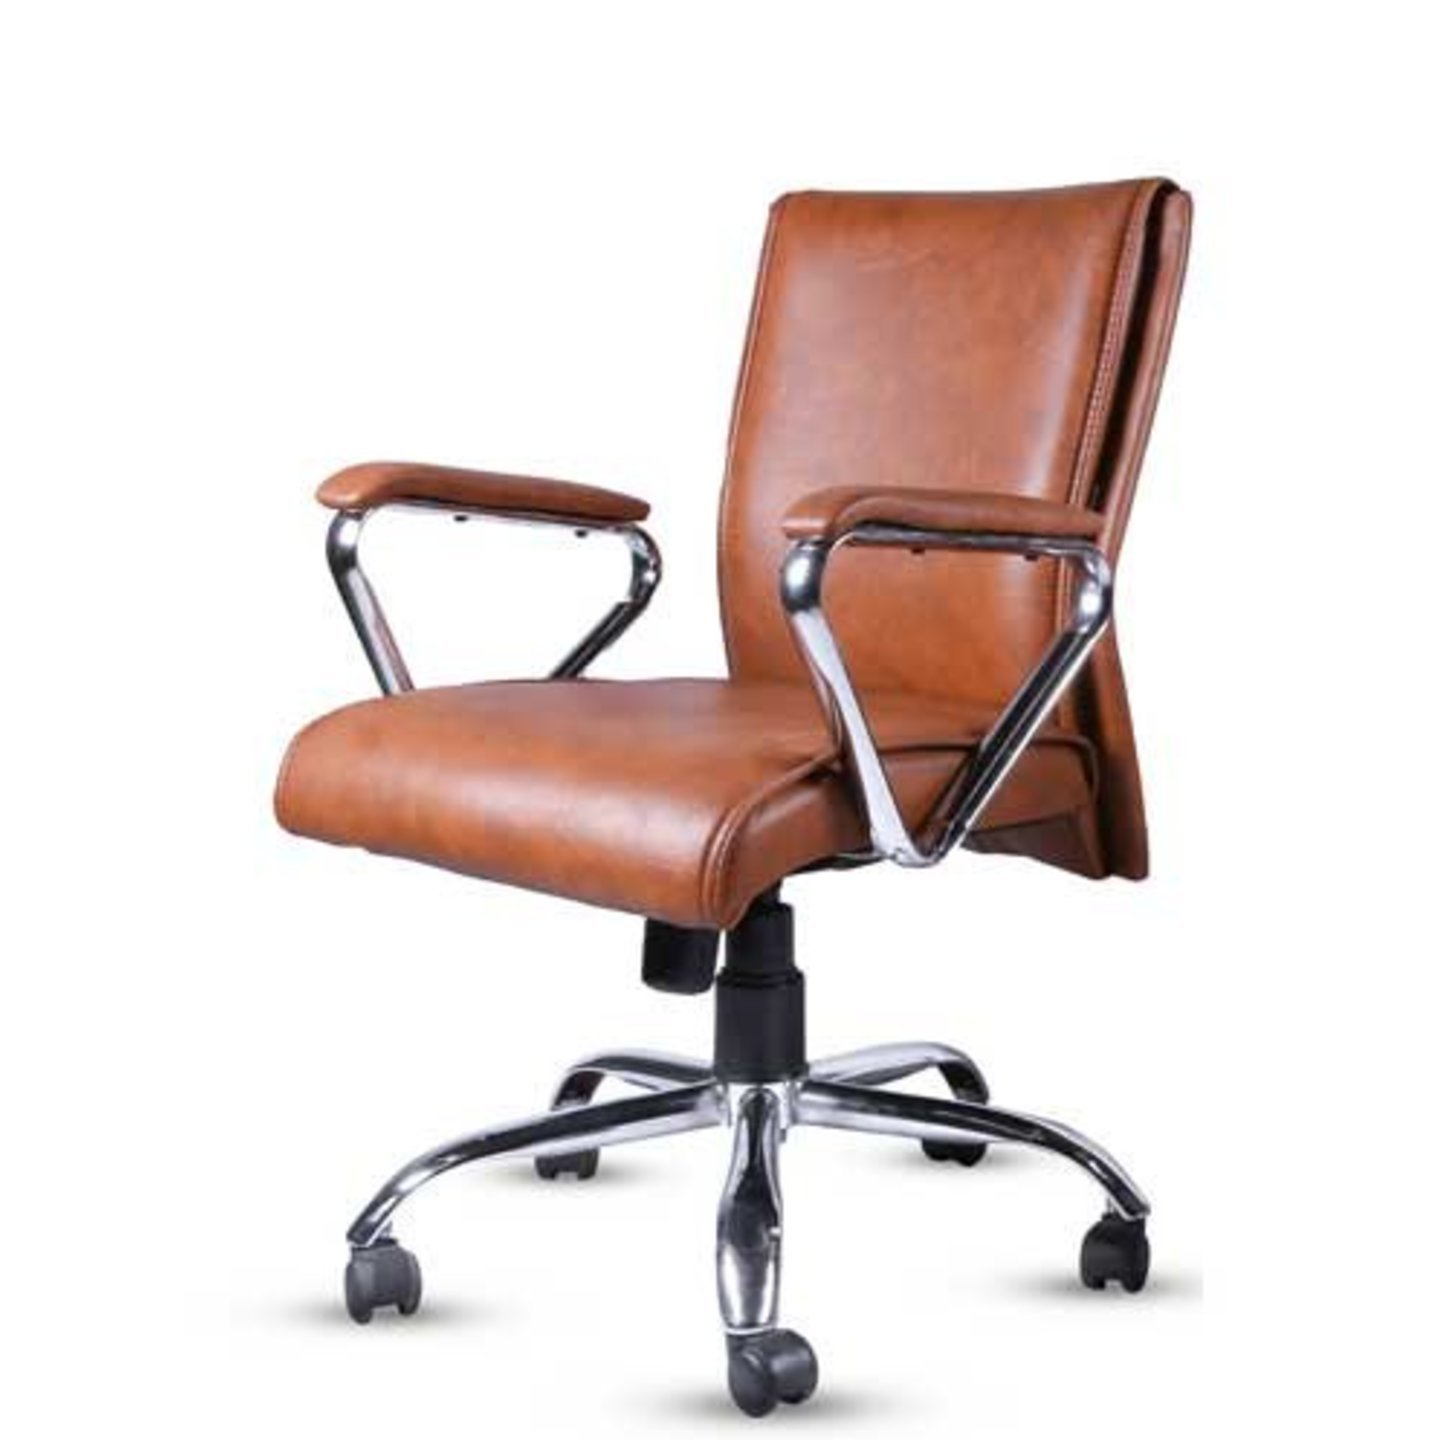 Low Back Chair Trendy LB Manual Mechanism System